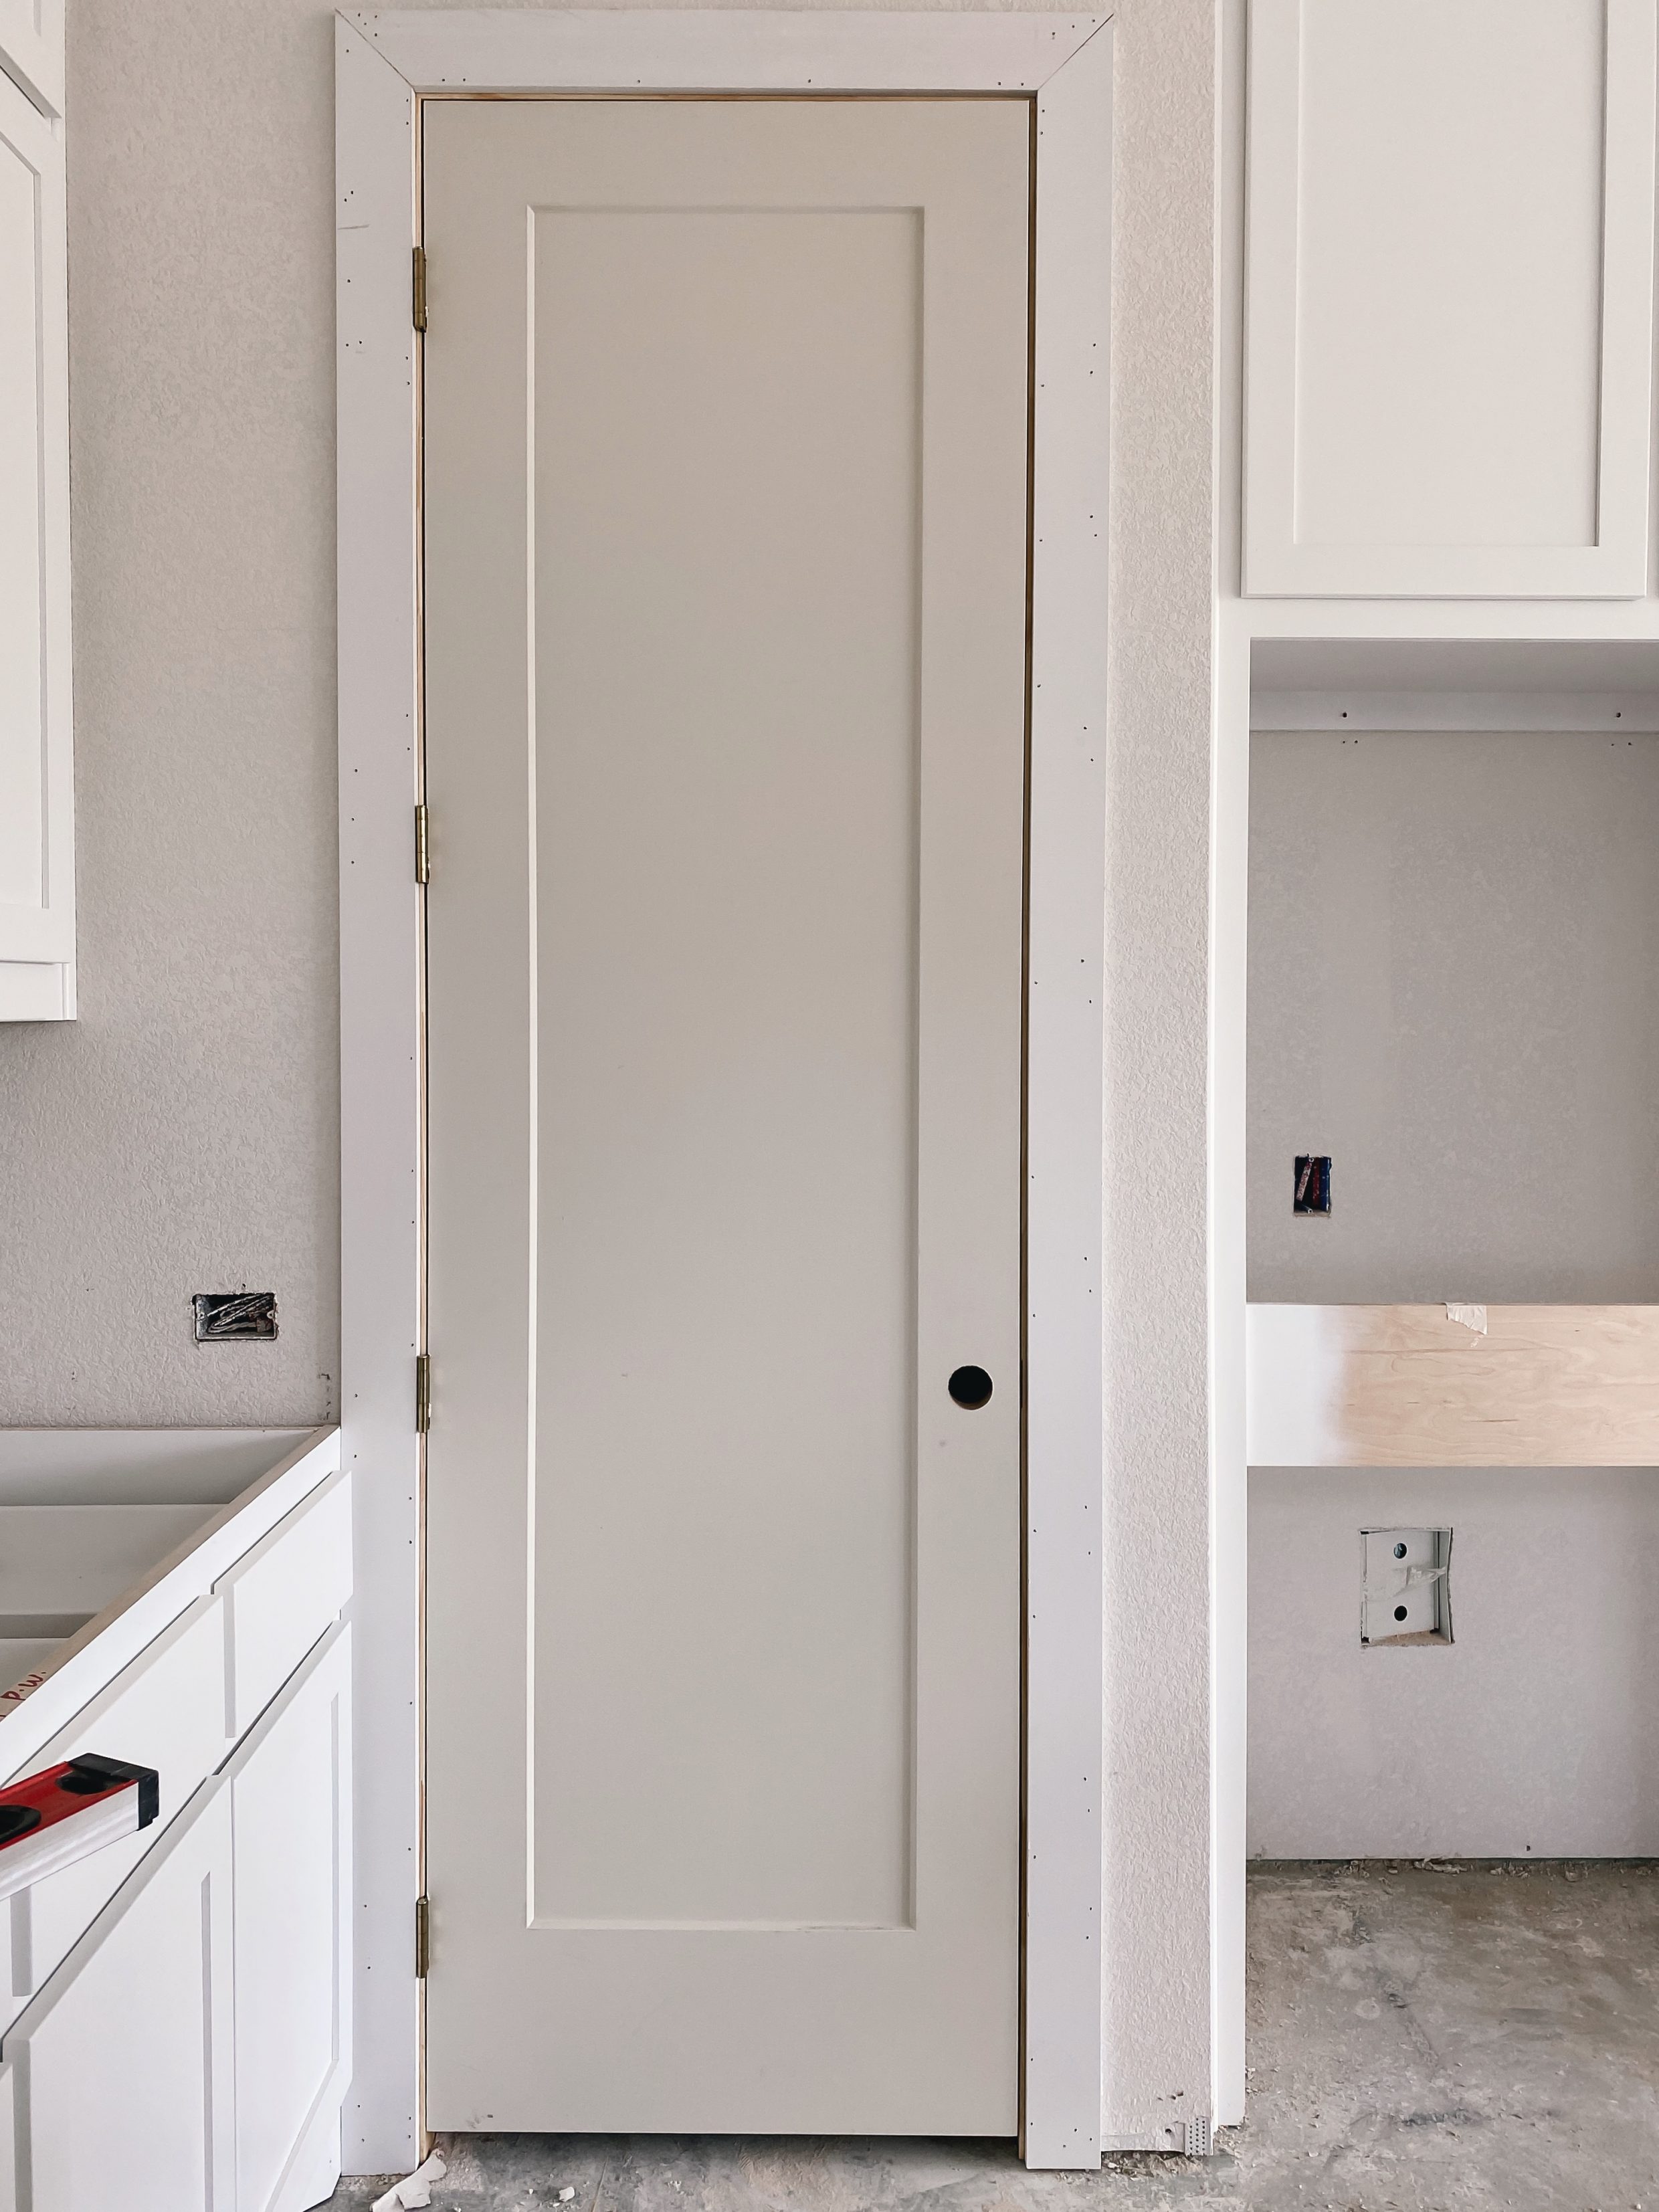 Eight feet tall shaker style pantry door in a new build home in Dallas